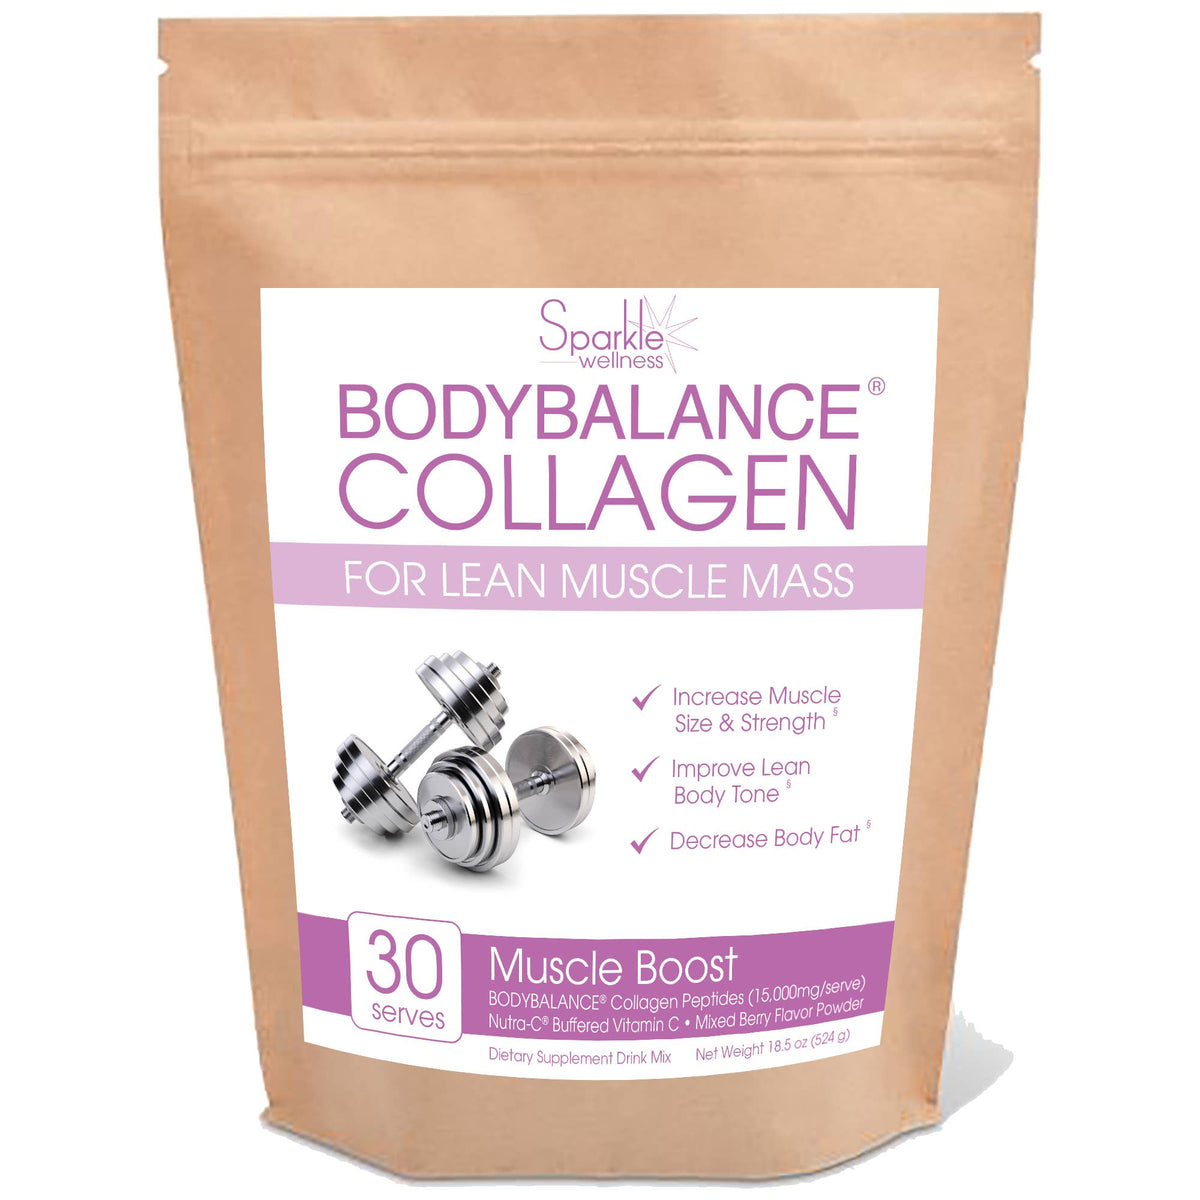 Body Balance Collagen for Lean Muscle Mass